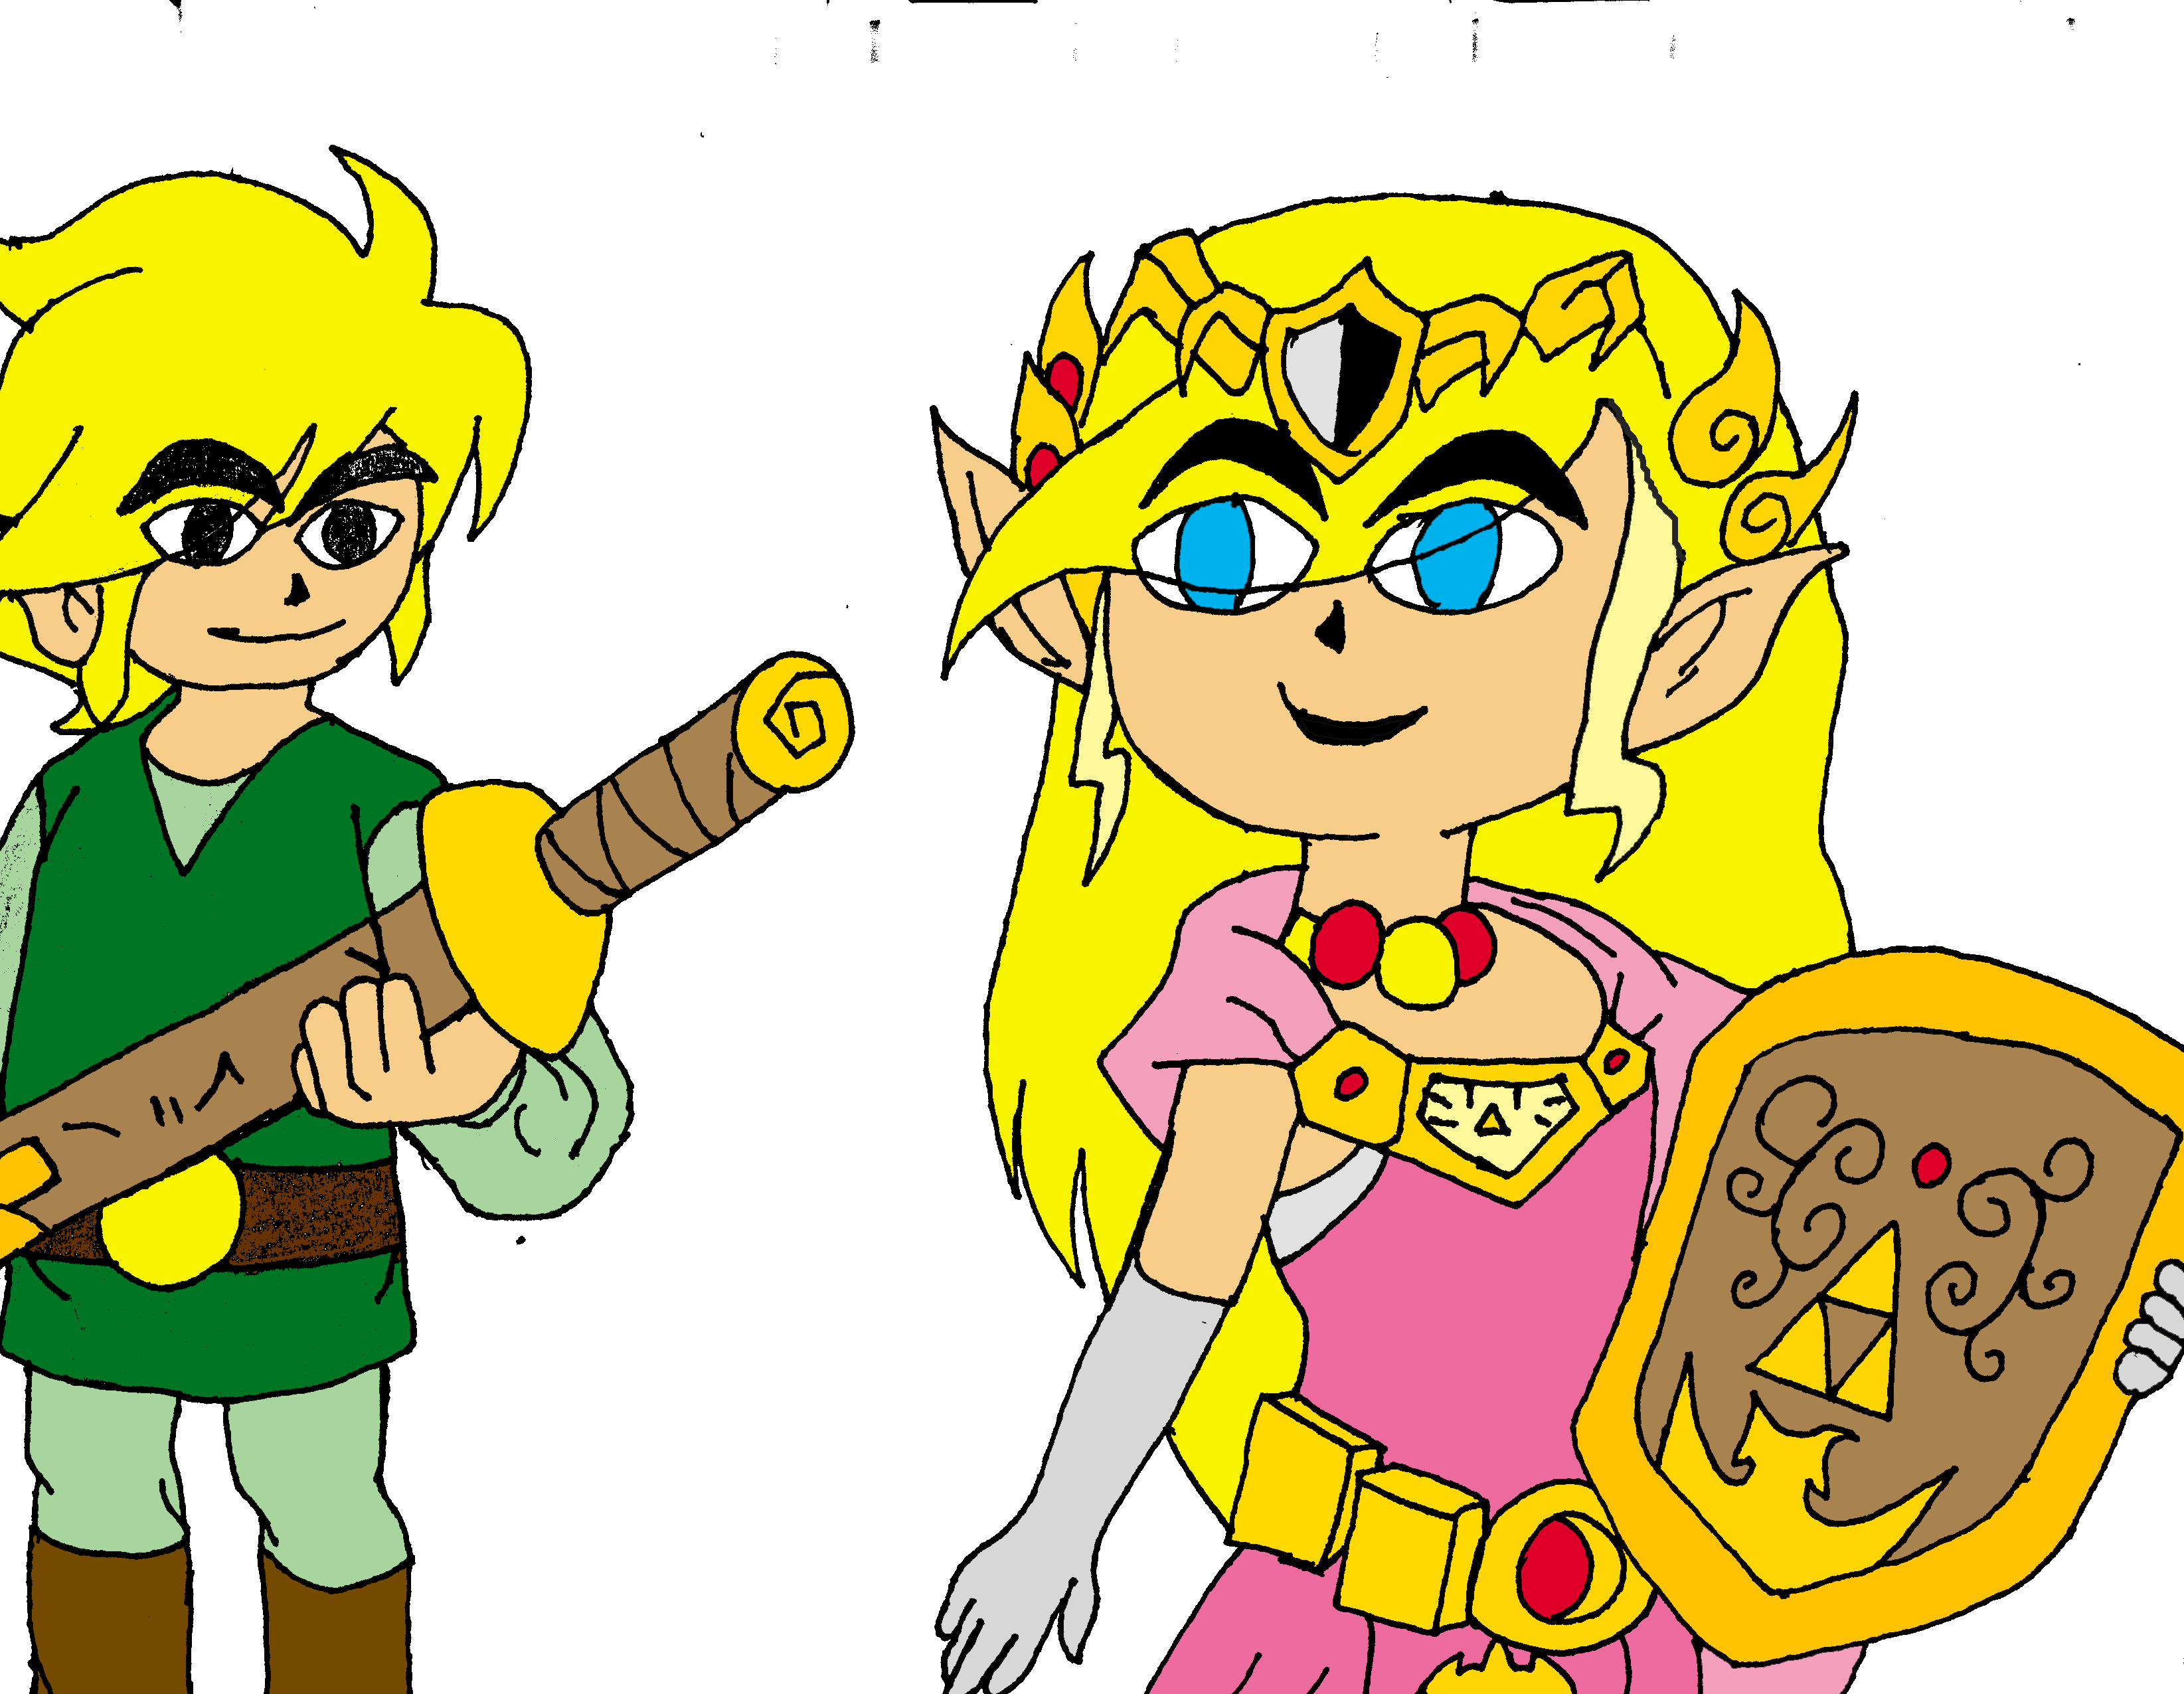 link and zelda by archeological-mania